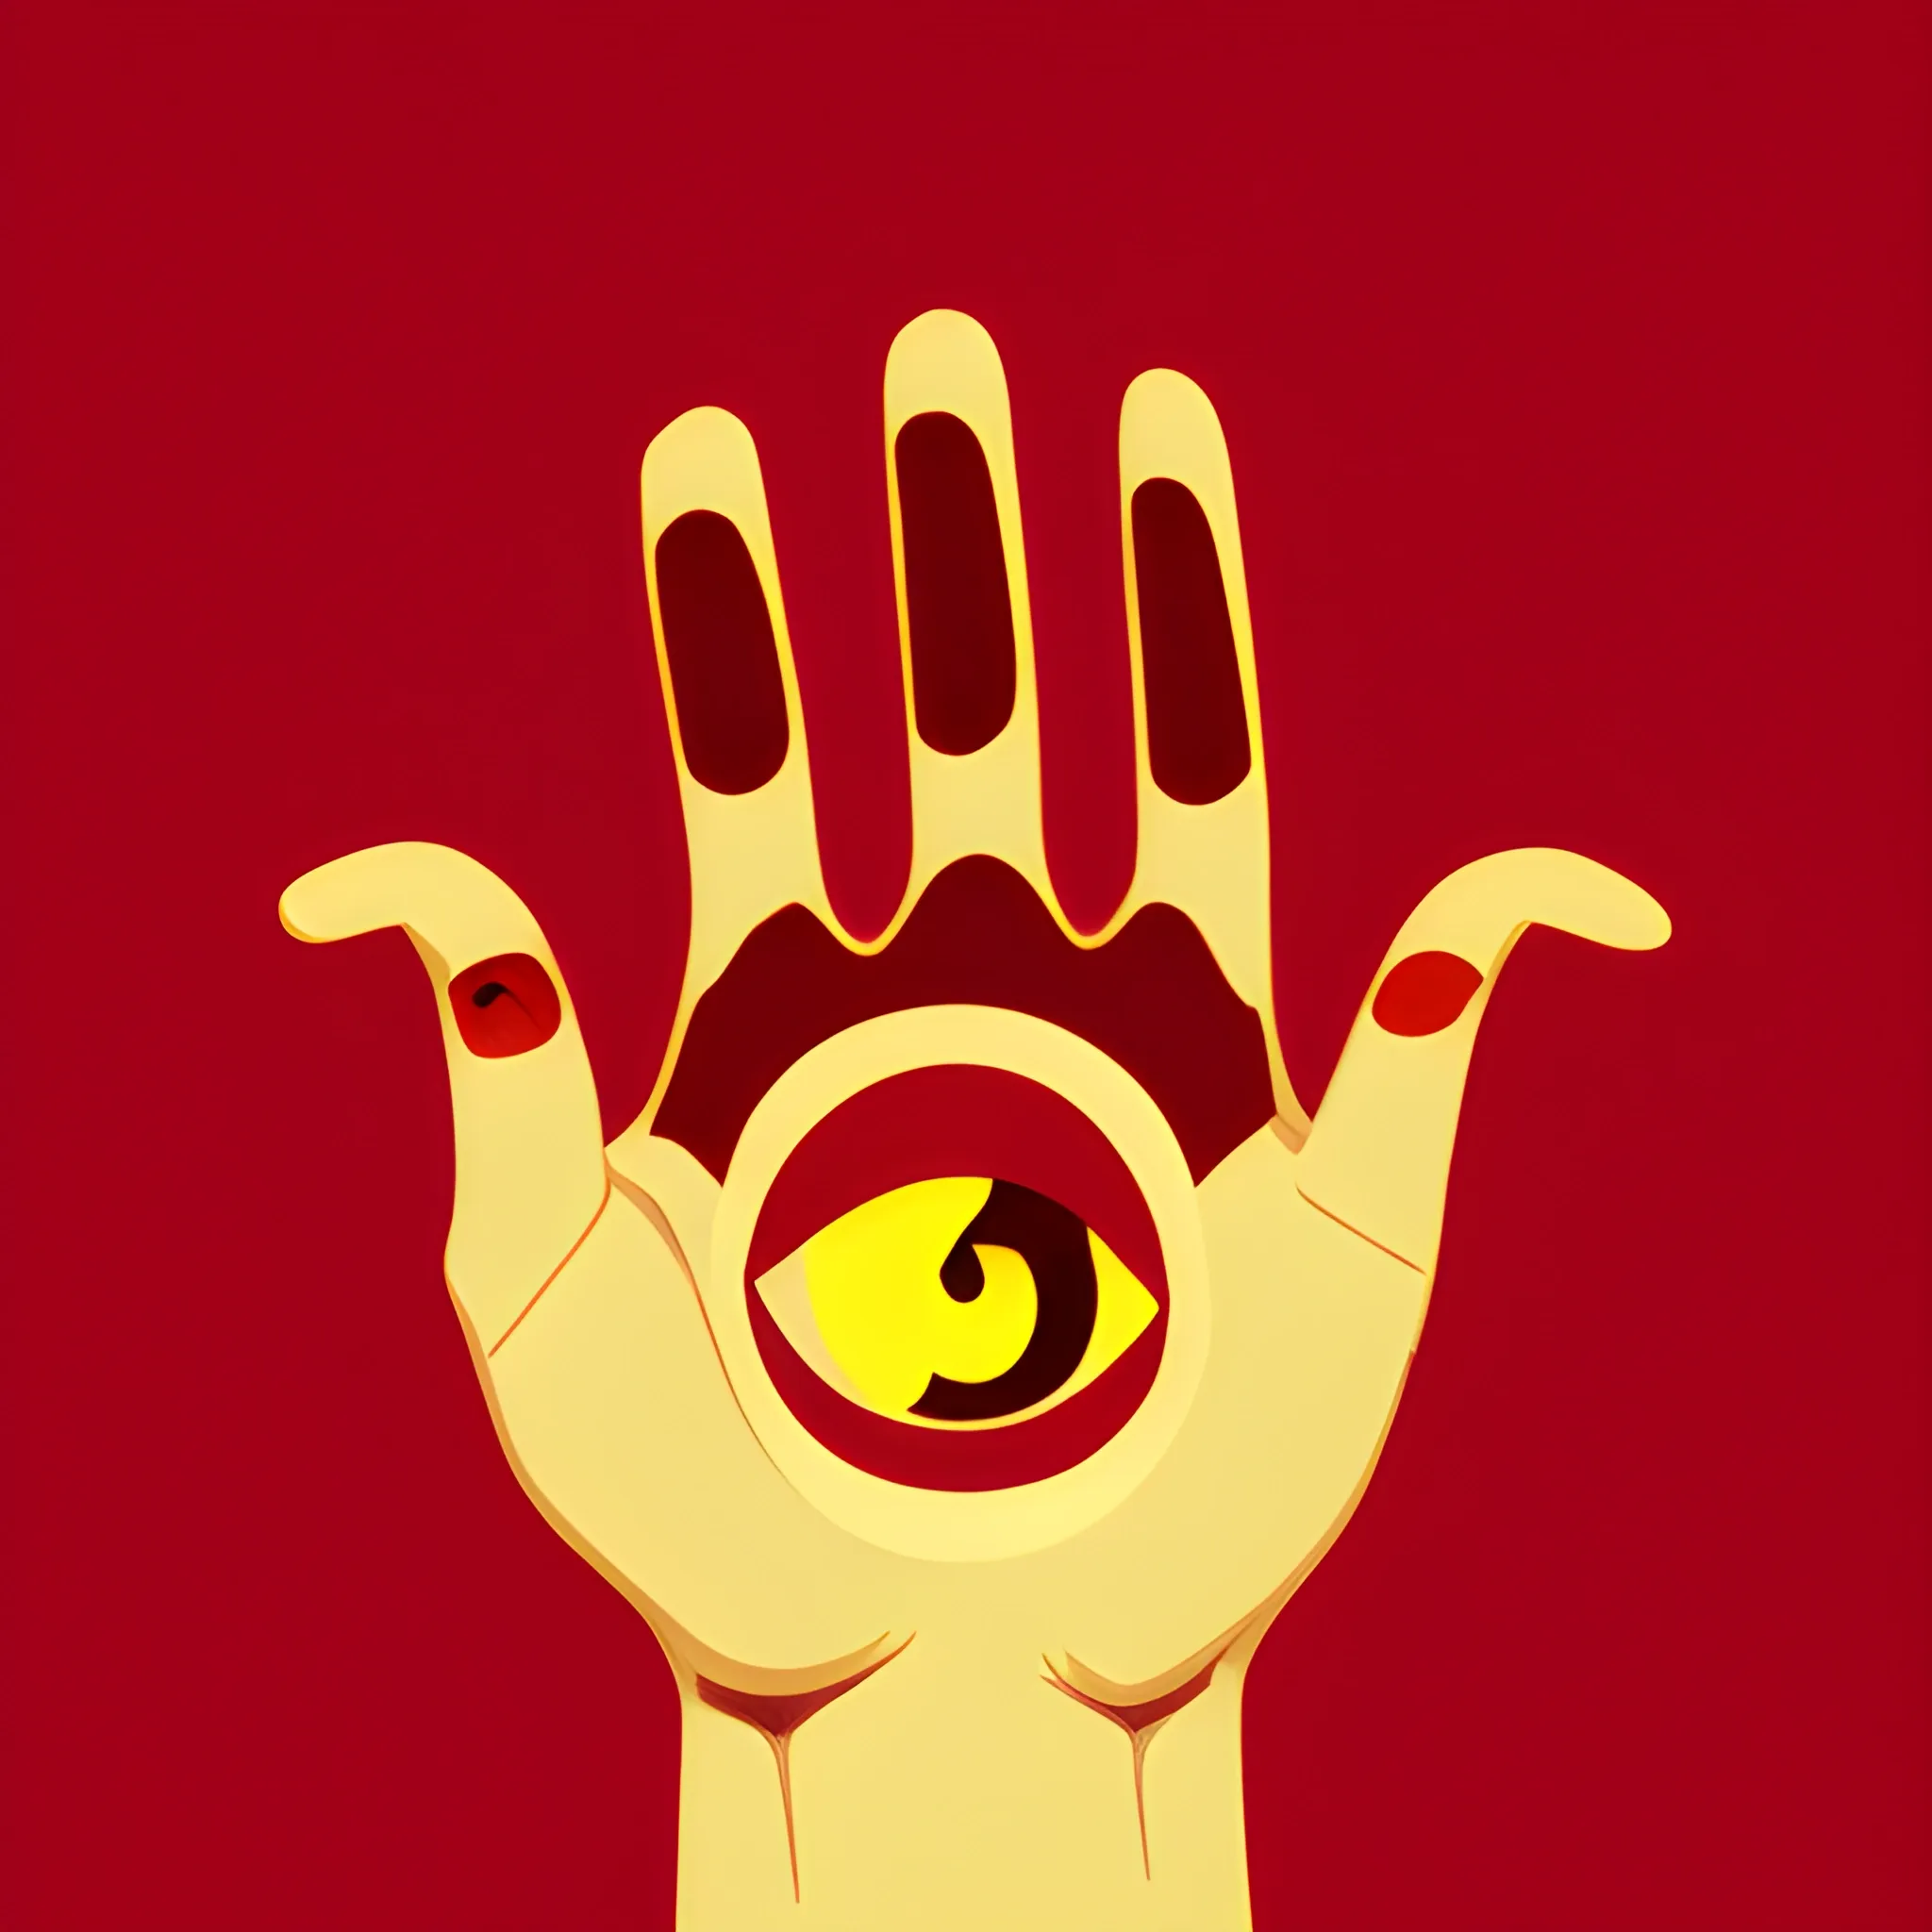 A red open hand witha a yellow eye in the middle